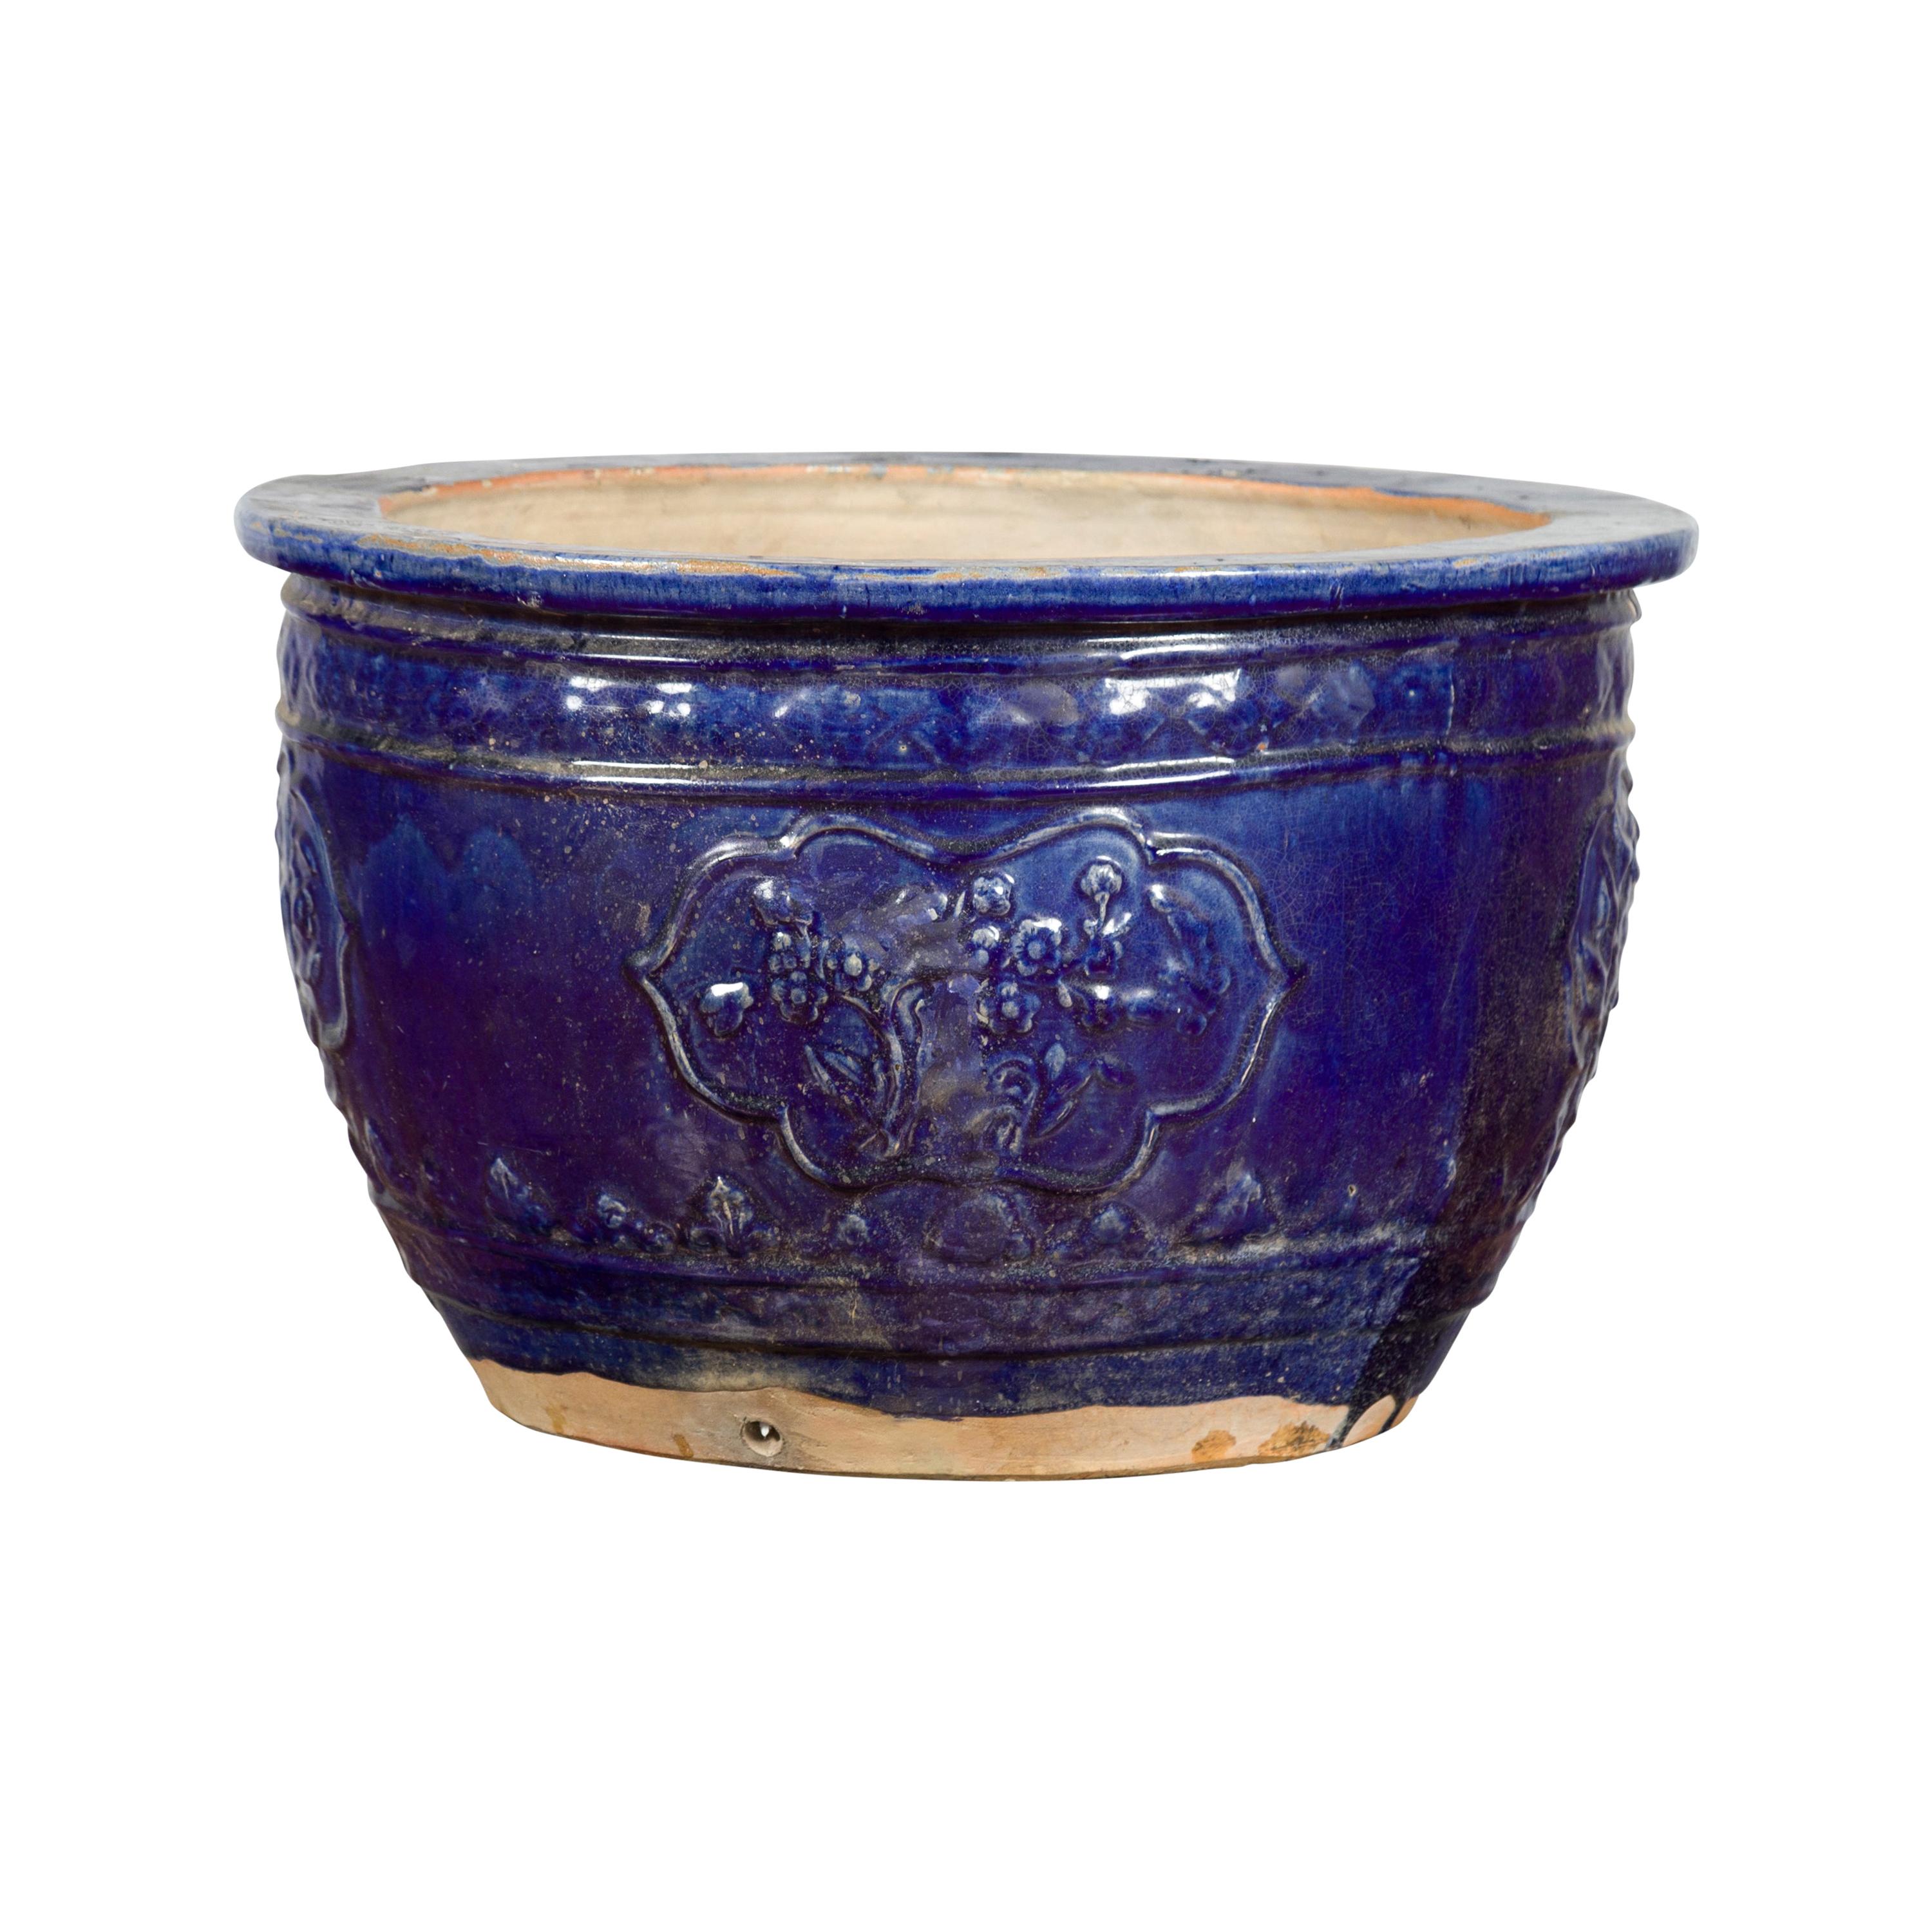 Large 19th Century Annamese Royal Blue Circular Planter with Floral Décor For Sale